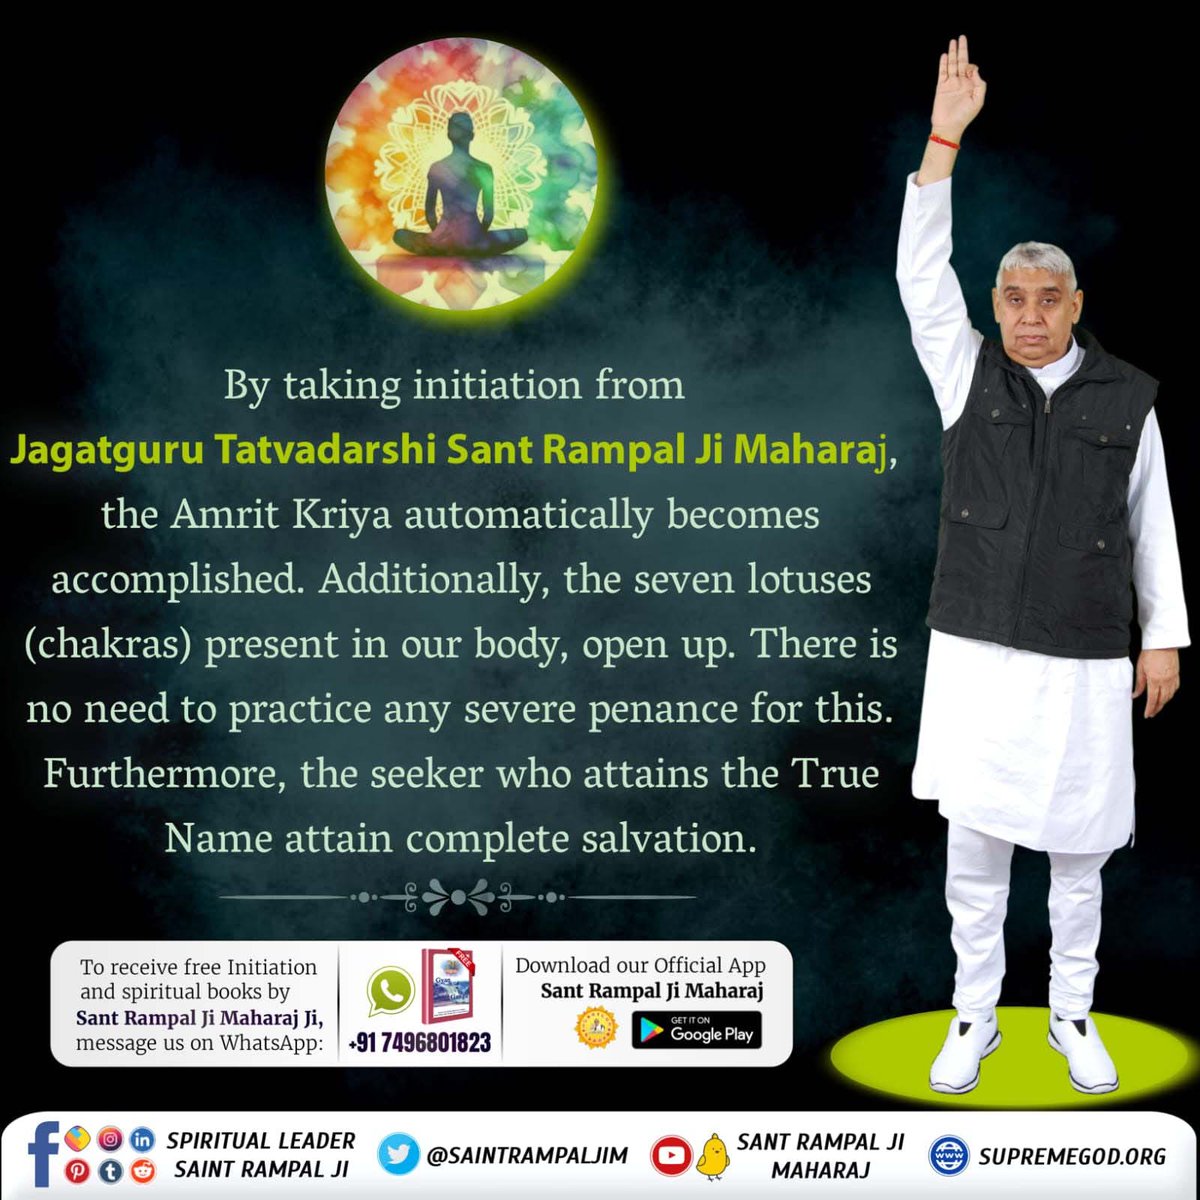 #What_Is_Meditation

🌻By taking initiation from Jagatguru Tatvadarshi Sant Rampal Ji Maharaj, the Amrit Kriya automatically becomes accomplished. Additionally, the seven lotuses (chakras) present in our body, open up. There is no need to practice any severe penance for this.